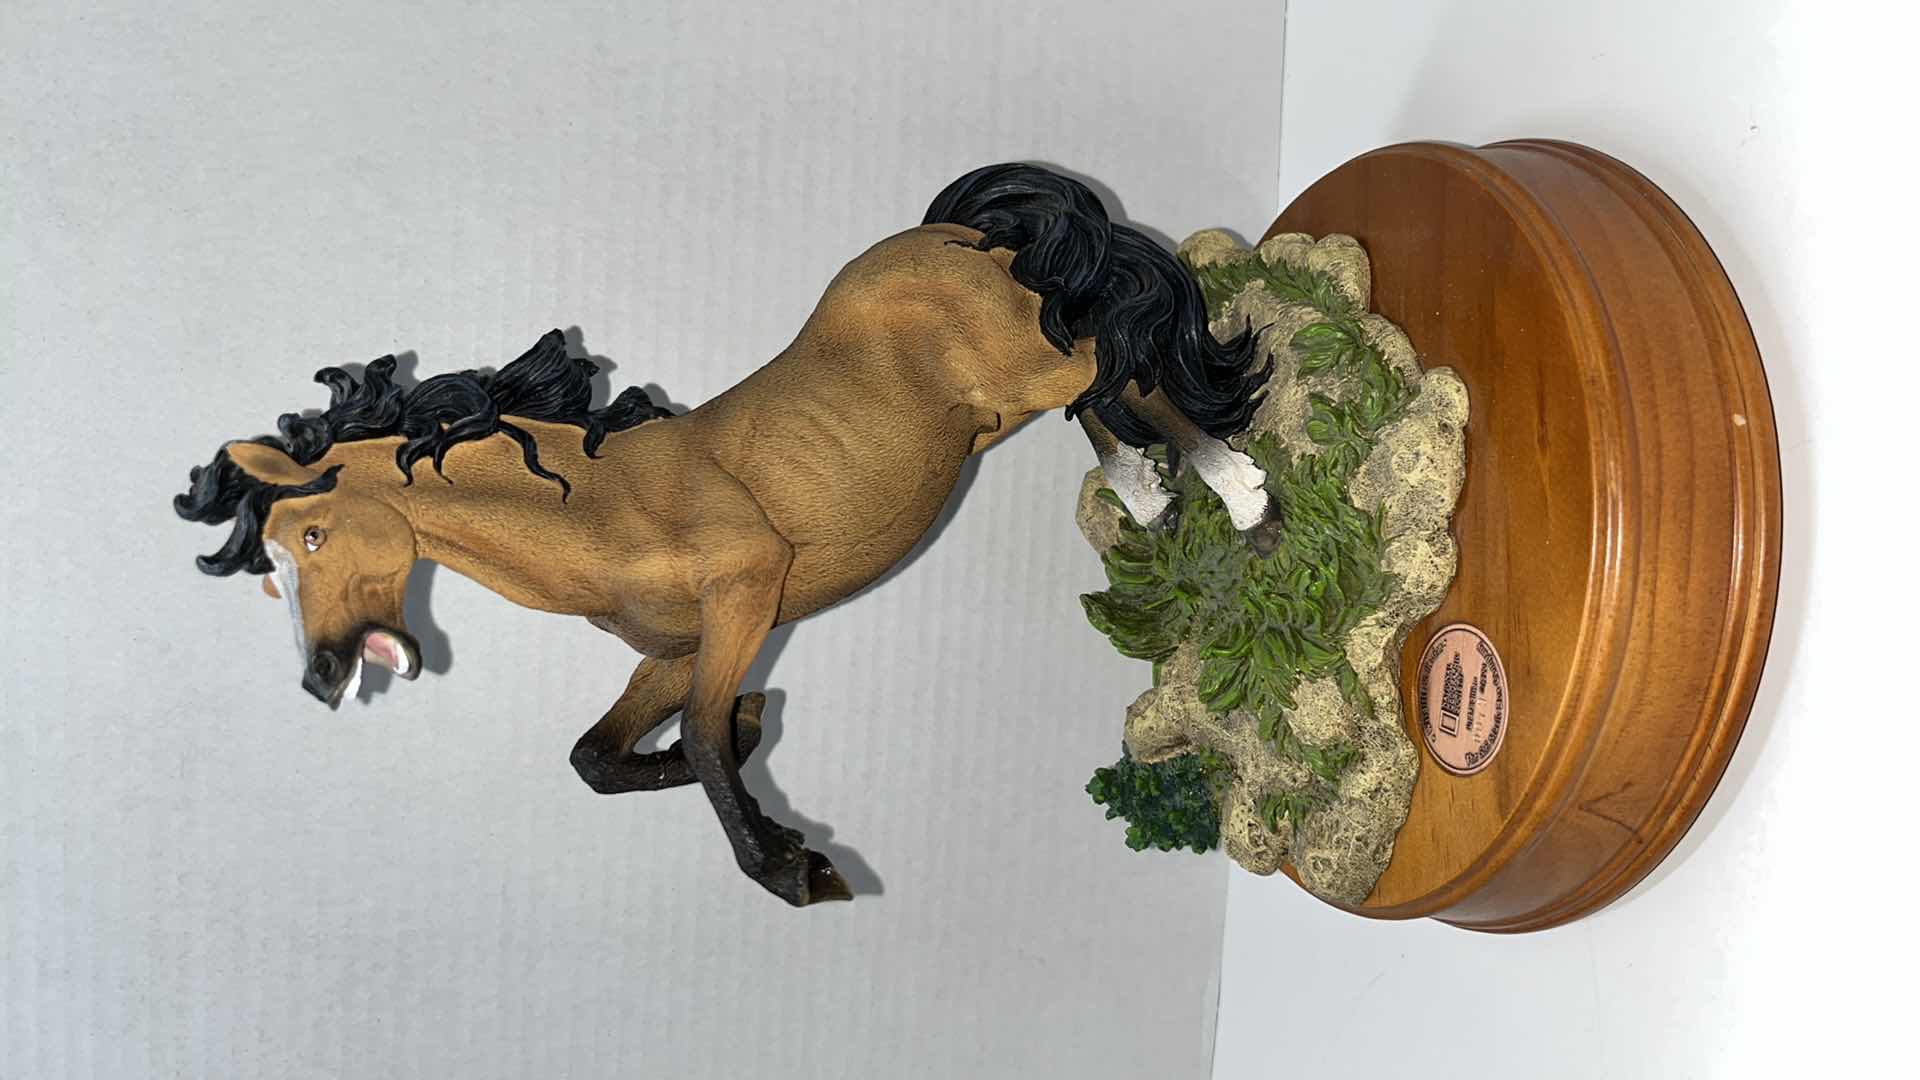 Photo 1 of THE SAN FRANCISCO MUSIC BOX & GIFT CO NATIONAL GEOGRAPHIC SOCIETY WILDLIFE COLLECTION LIMITED EDITION HORSE STATUE & MUSIC BOX “CLAIR DE LUNE”, #13 OF 7,500